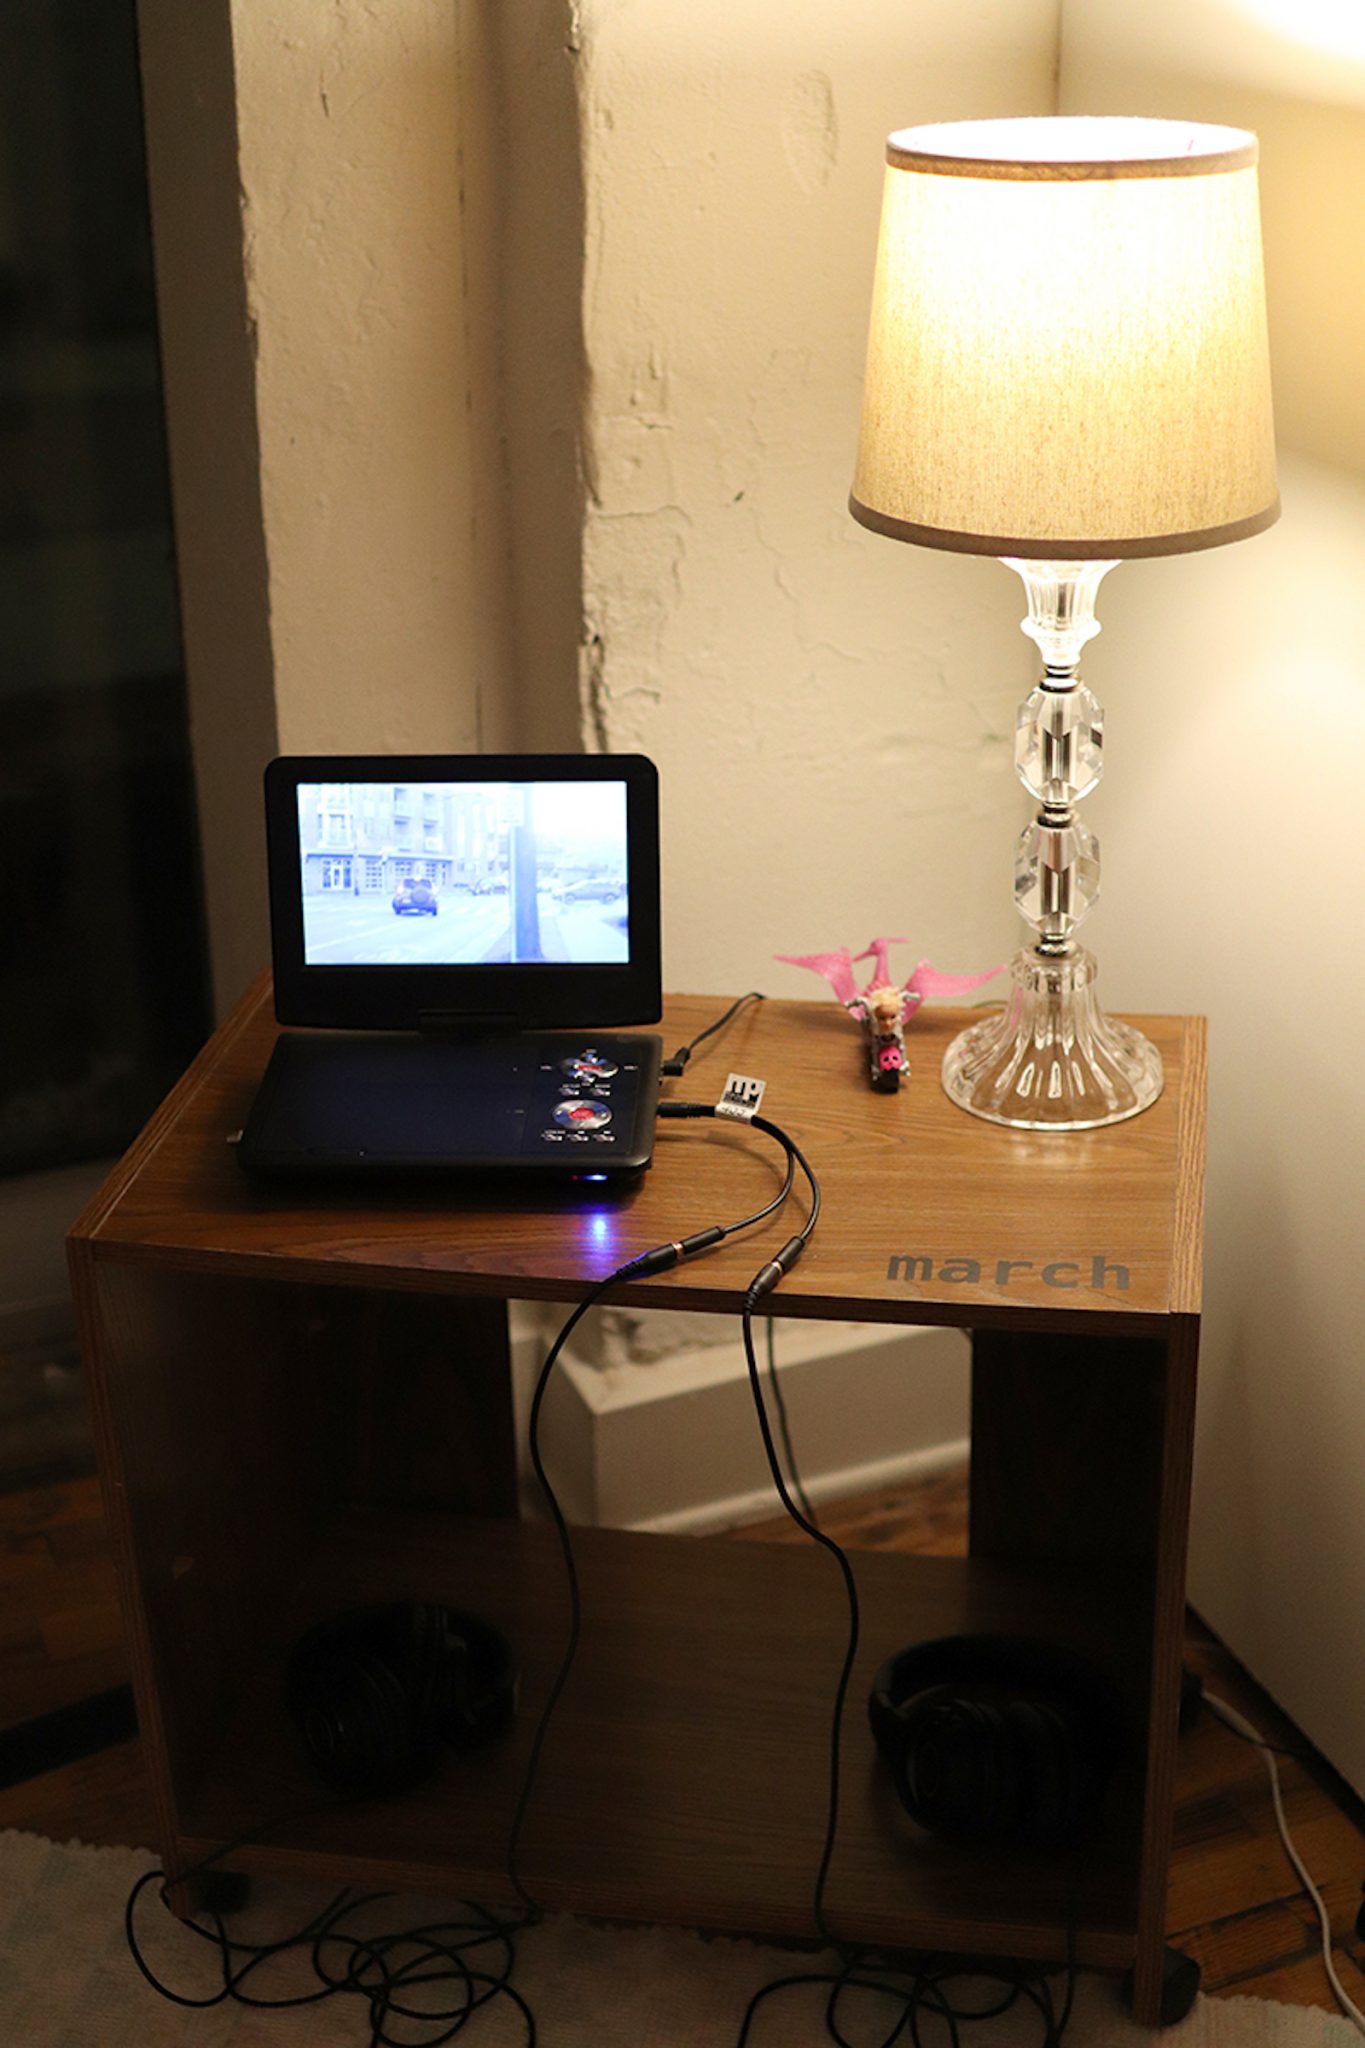 A small standalone dvd player on a table with a lamp